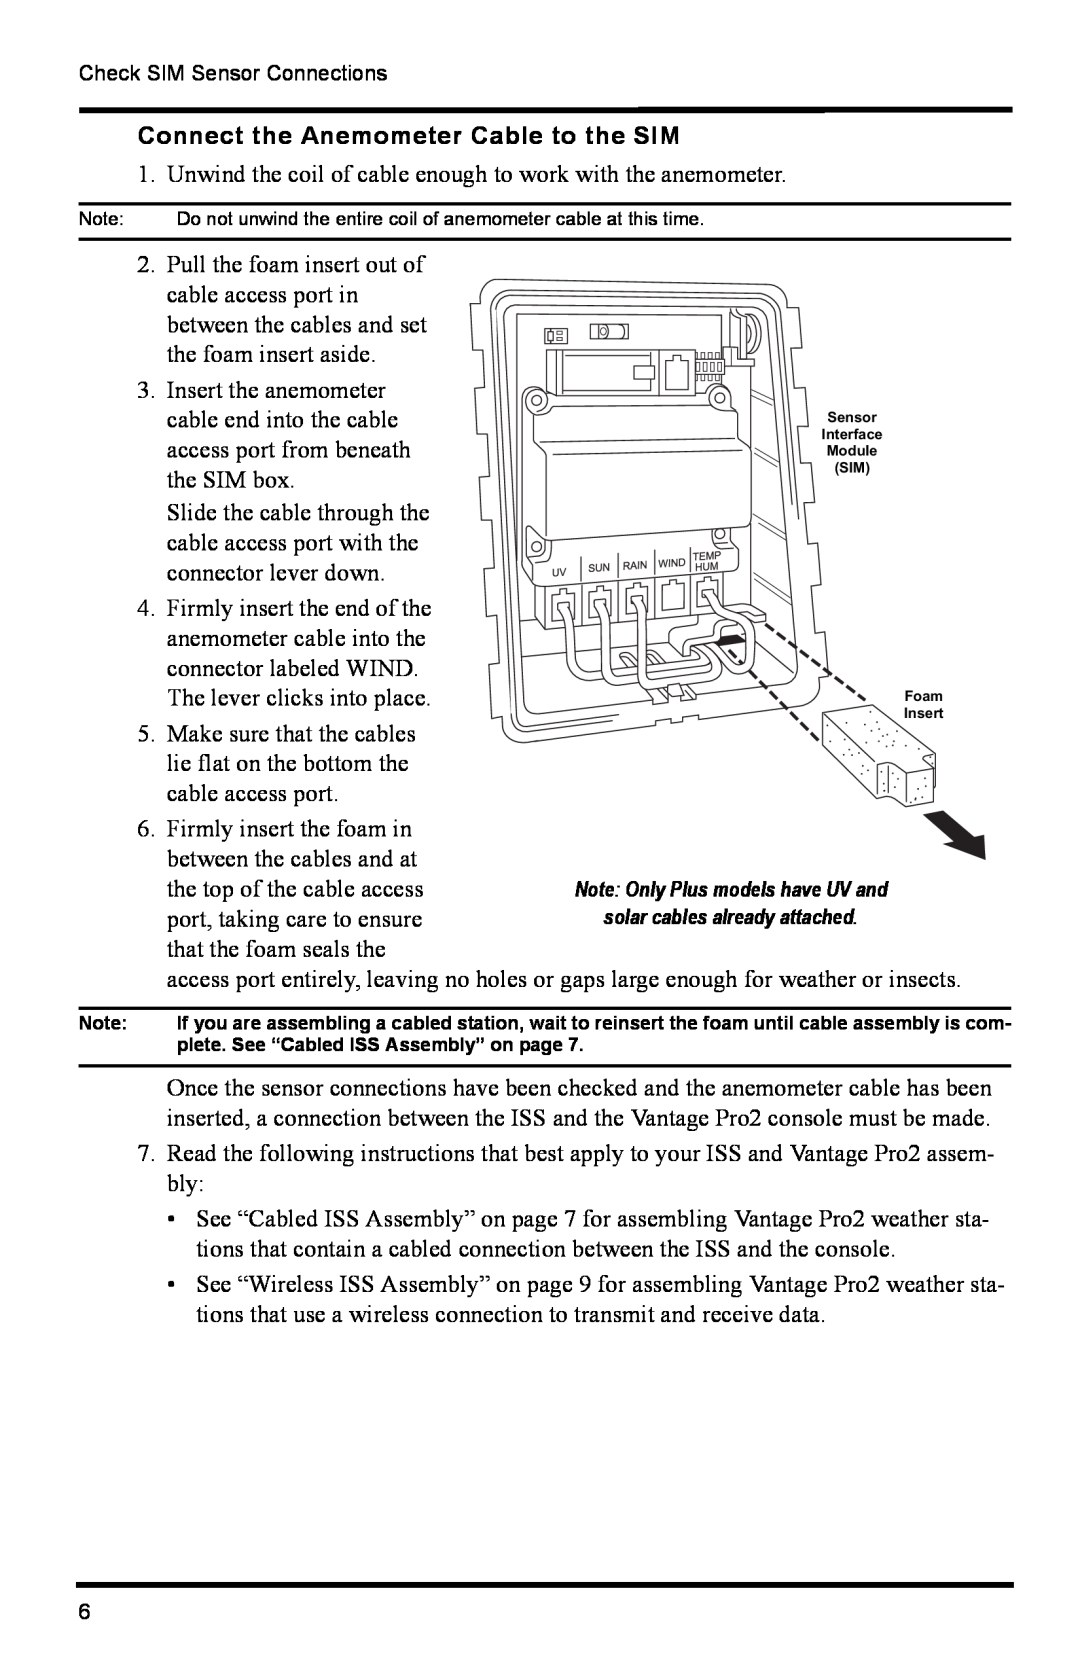 DAVIS 6322C installation manual Connect the Anemometer Cable to the SIM 